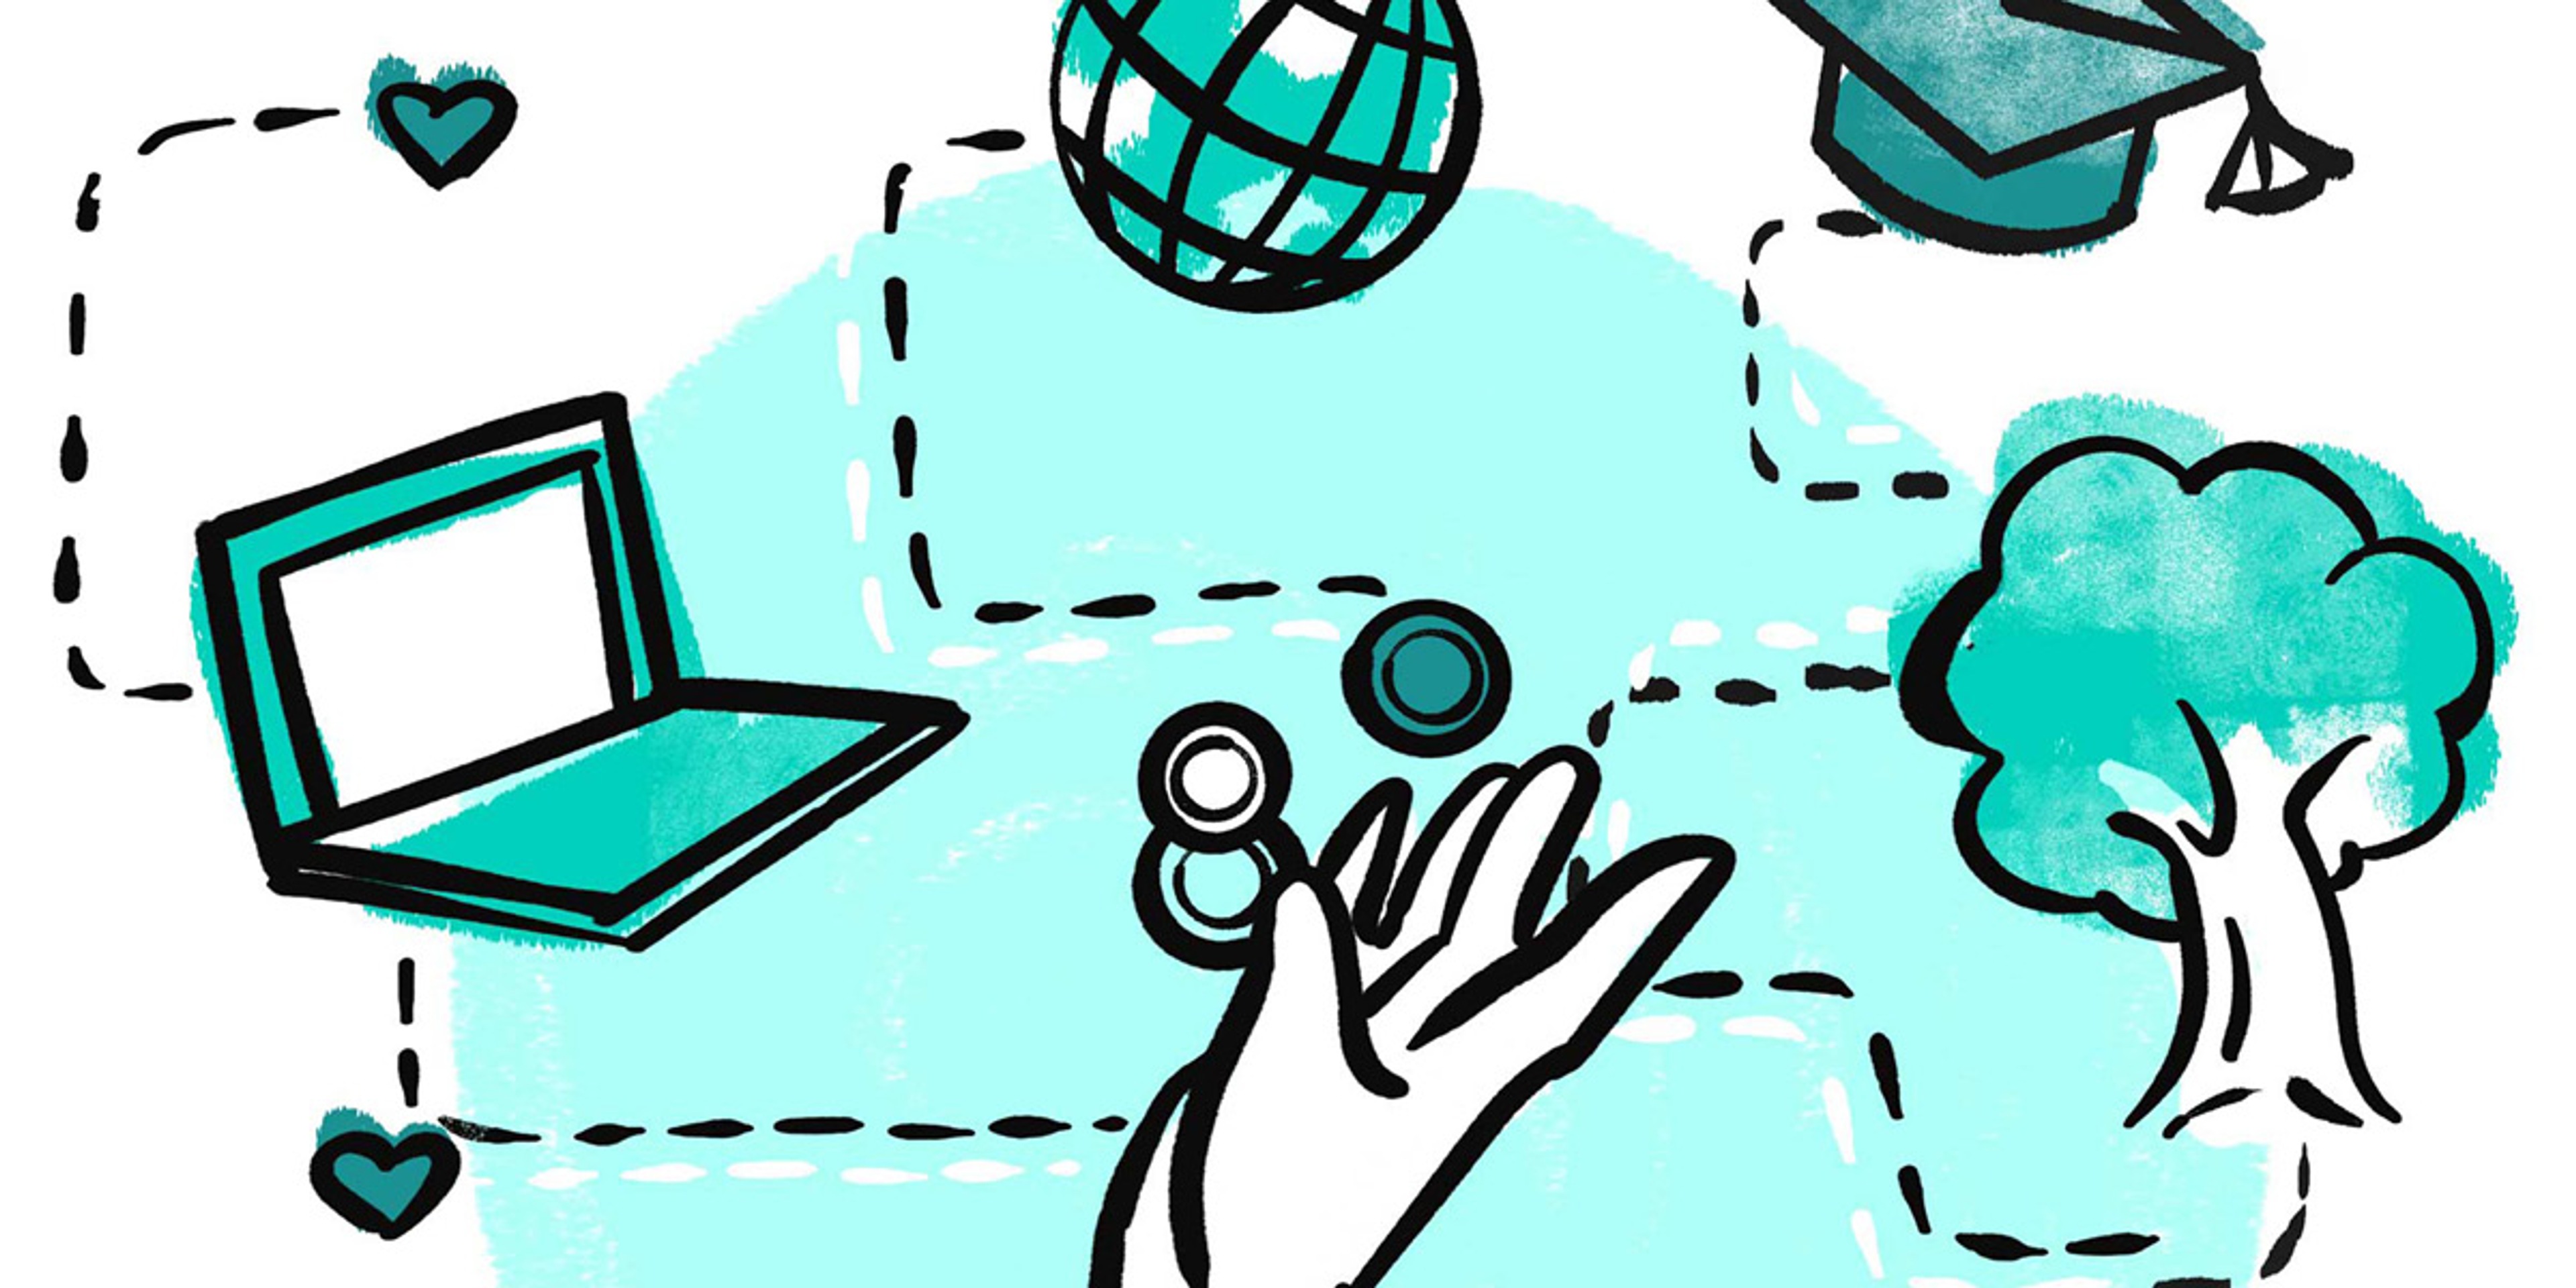 illustration showing a hand that gives money to different projects like education, computer science and sustainability